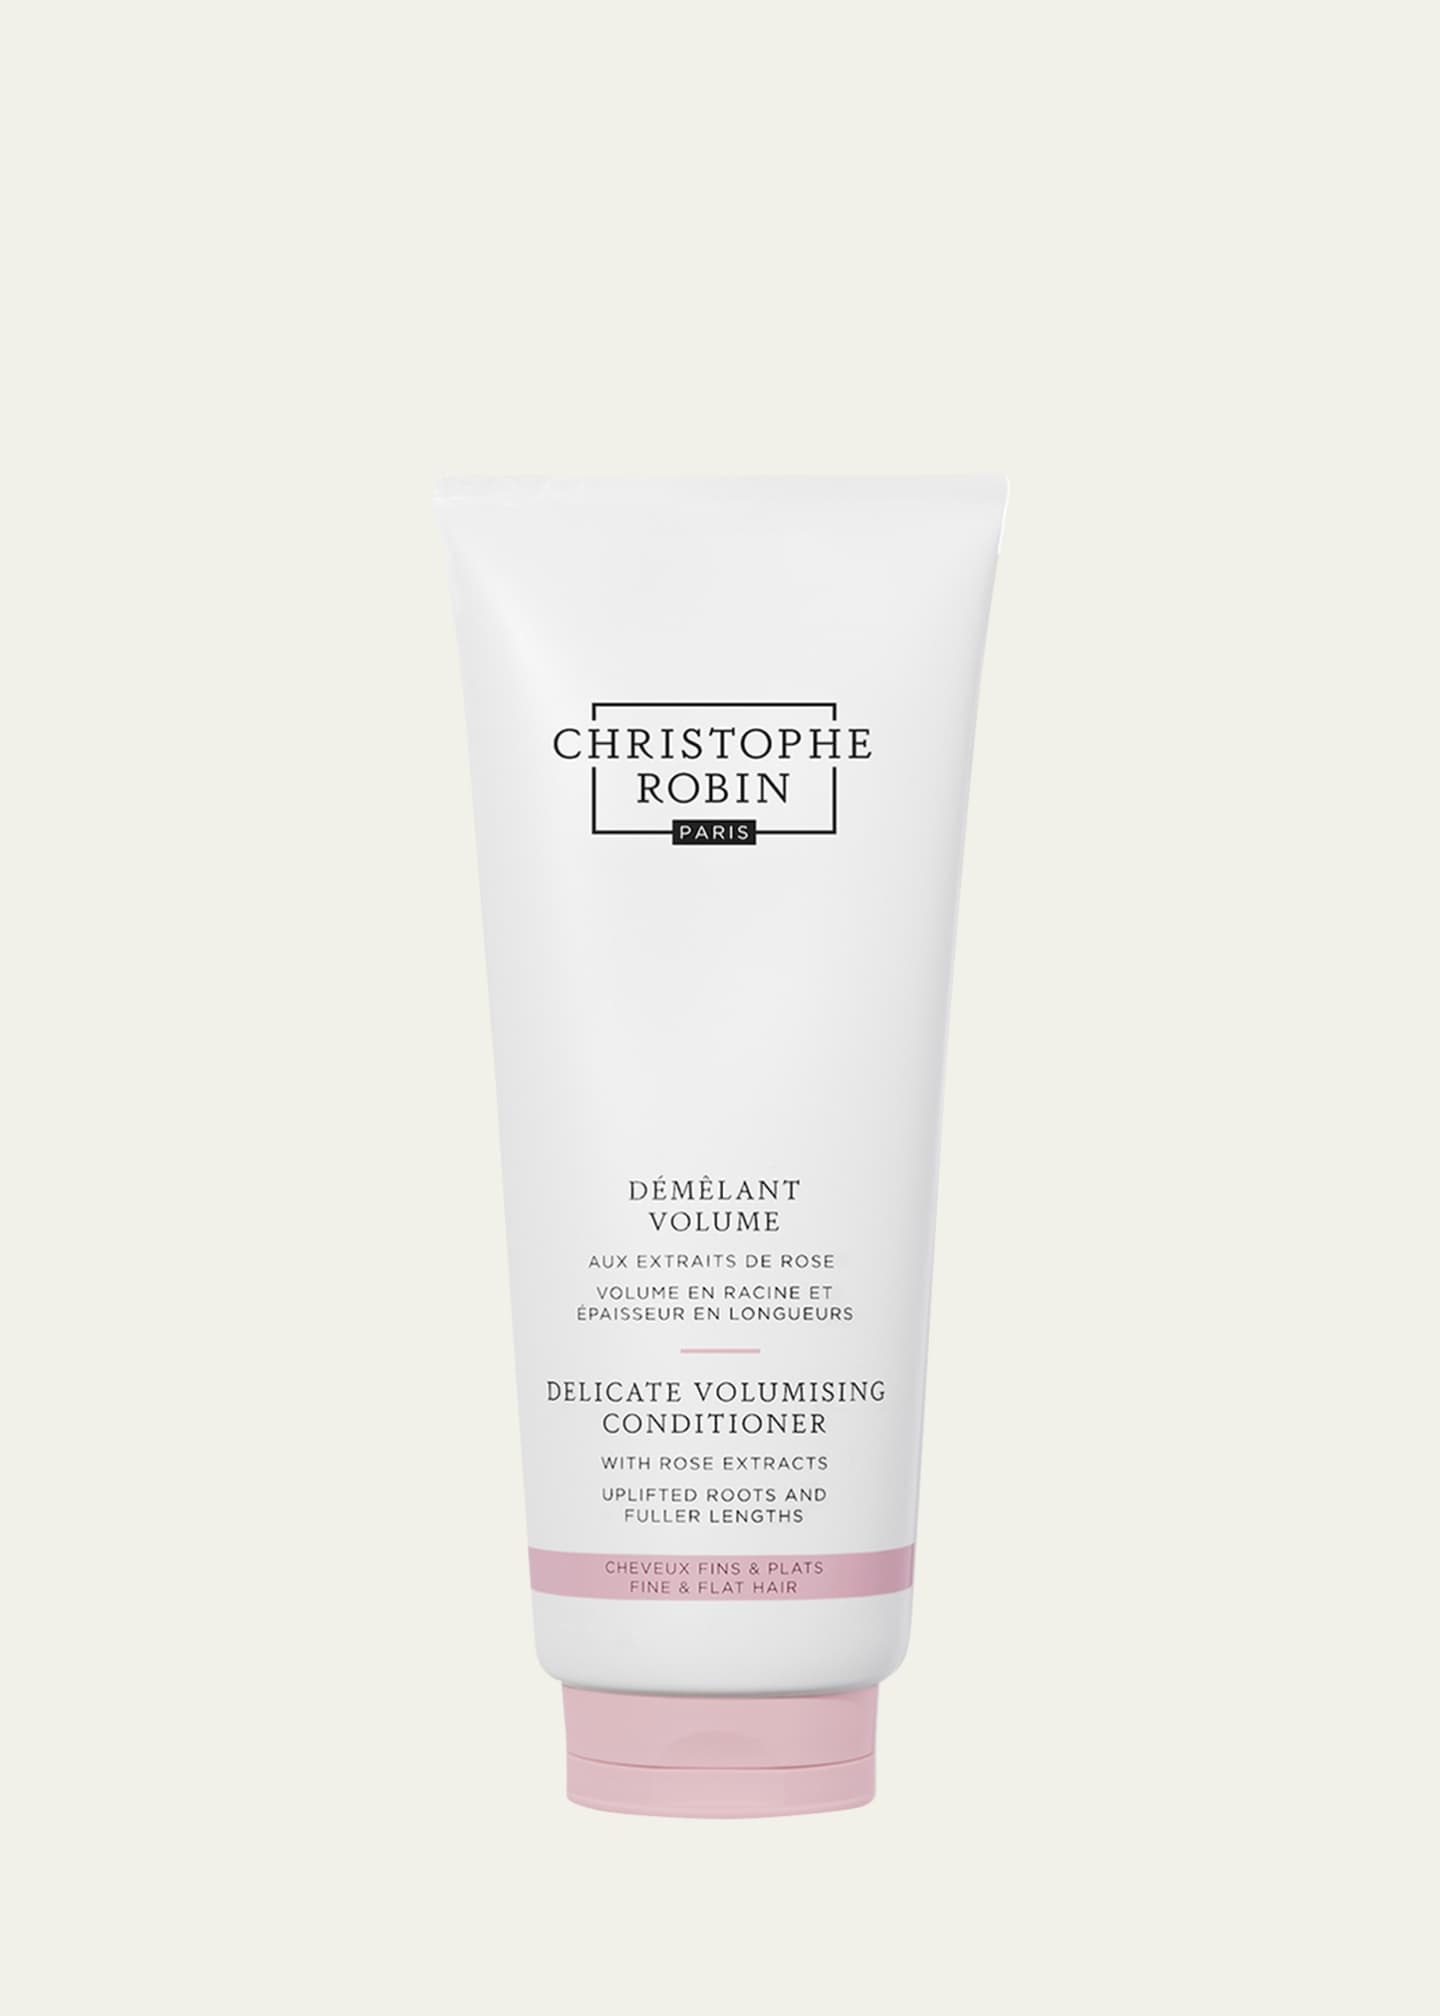 Christophe Robin 8.4 oz. Volumizing Conditioner With Rose Extracts Image 1 of 5